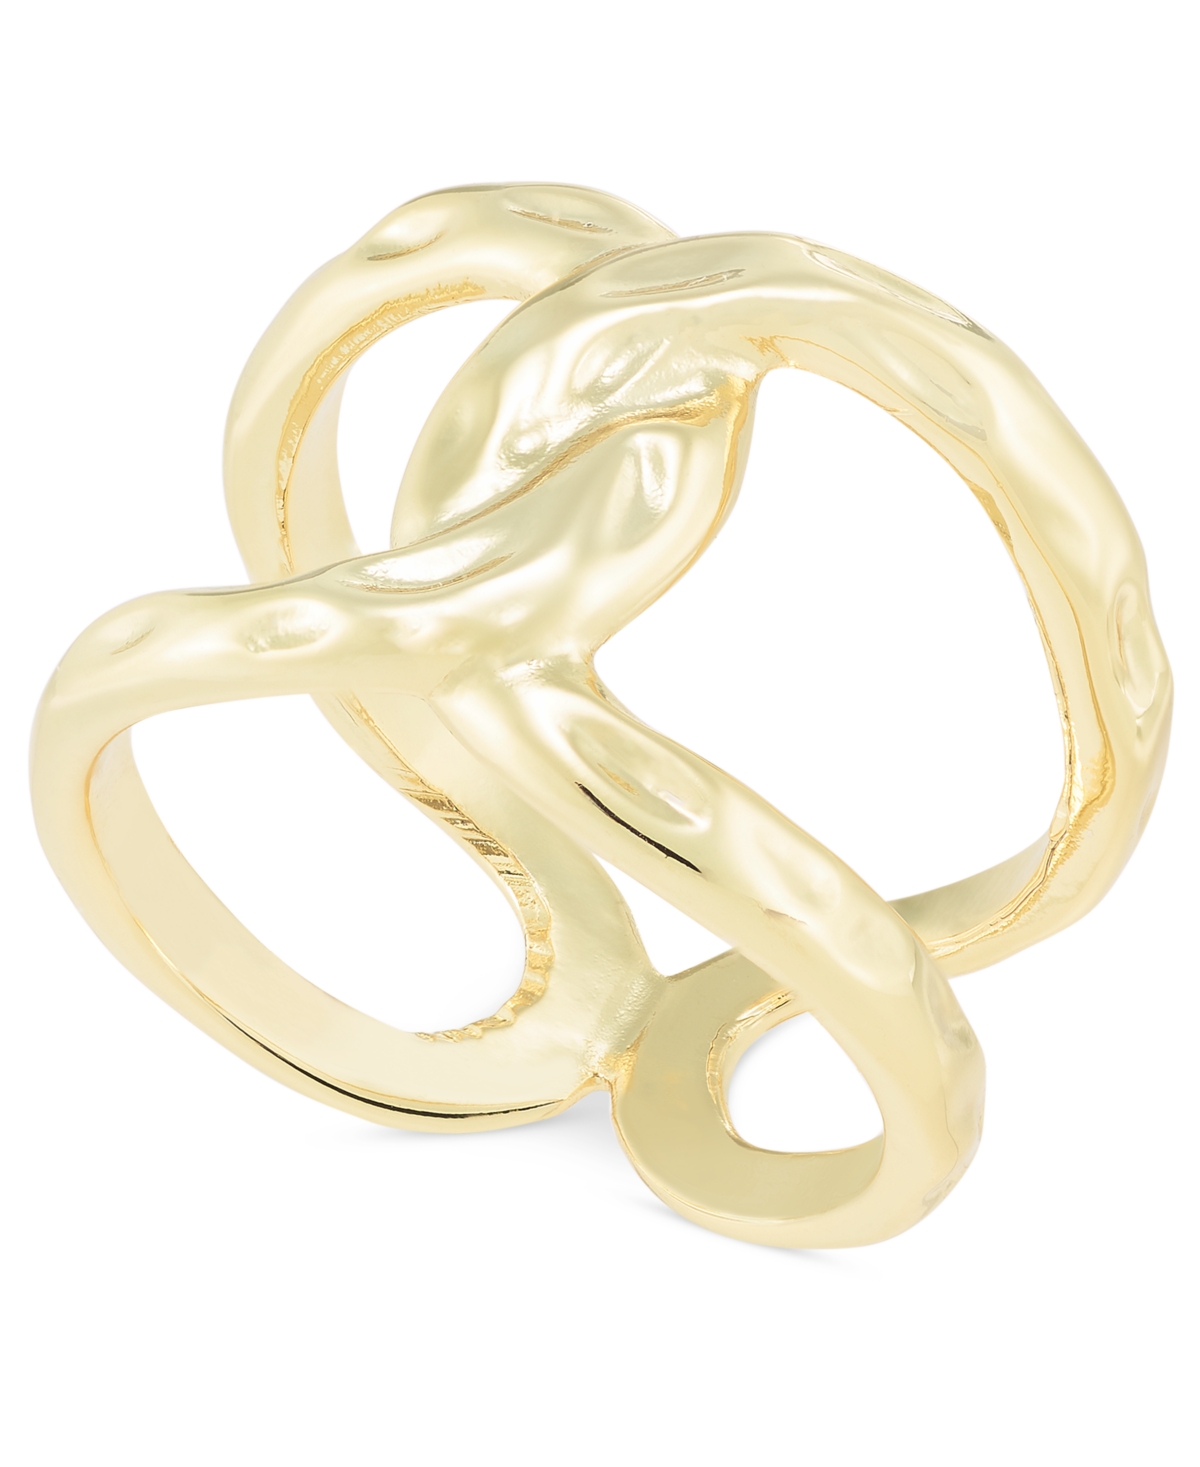 Helix Sculptural Ring, Created for Macy's - Gold